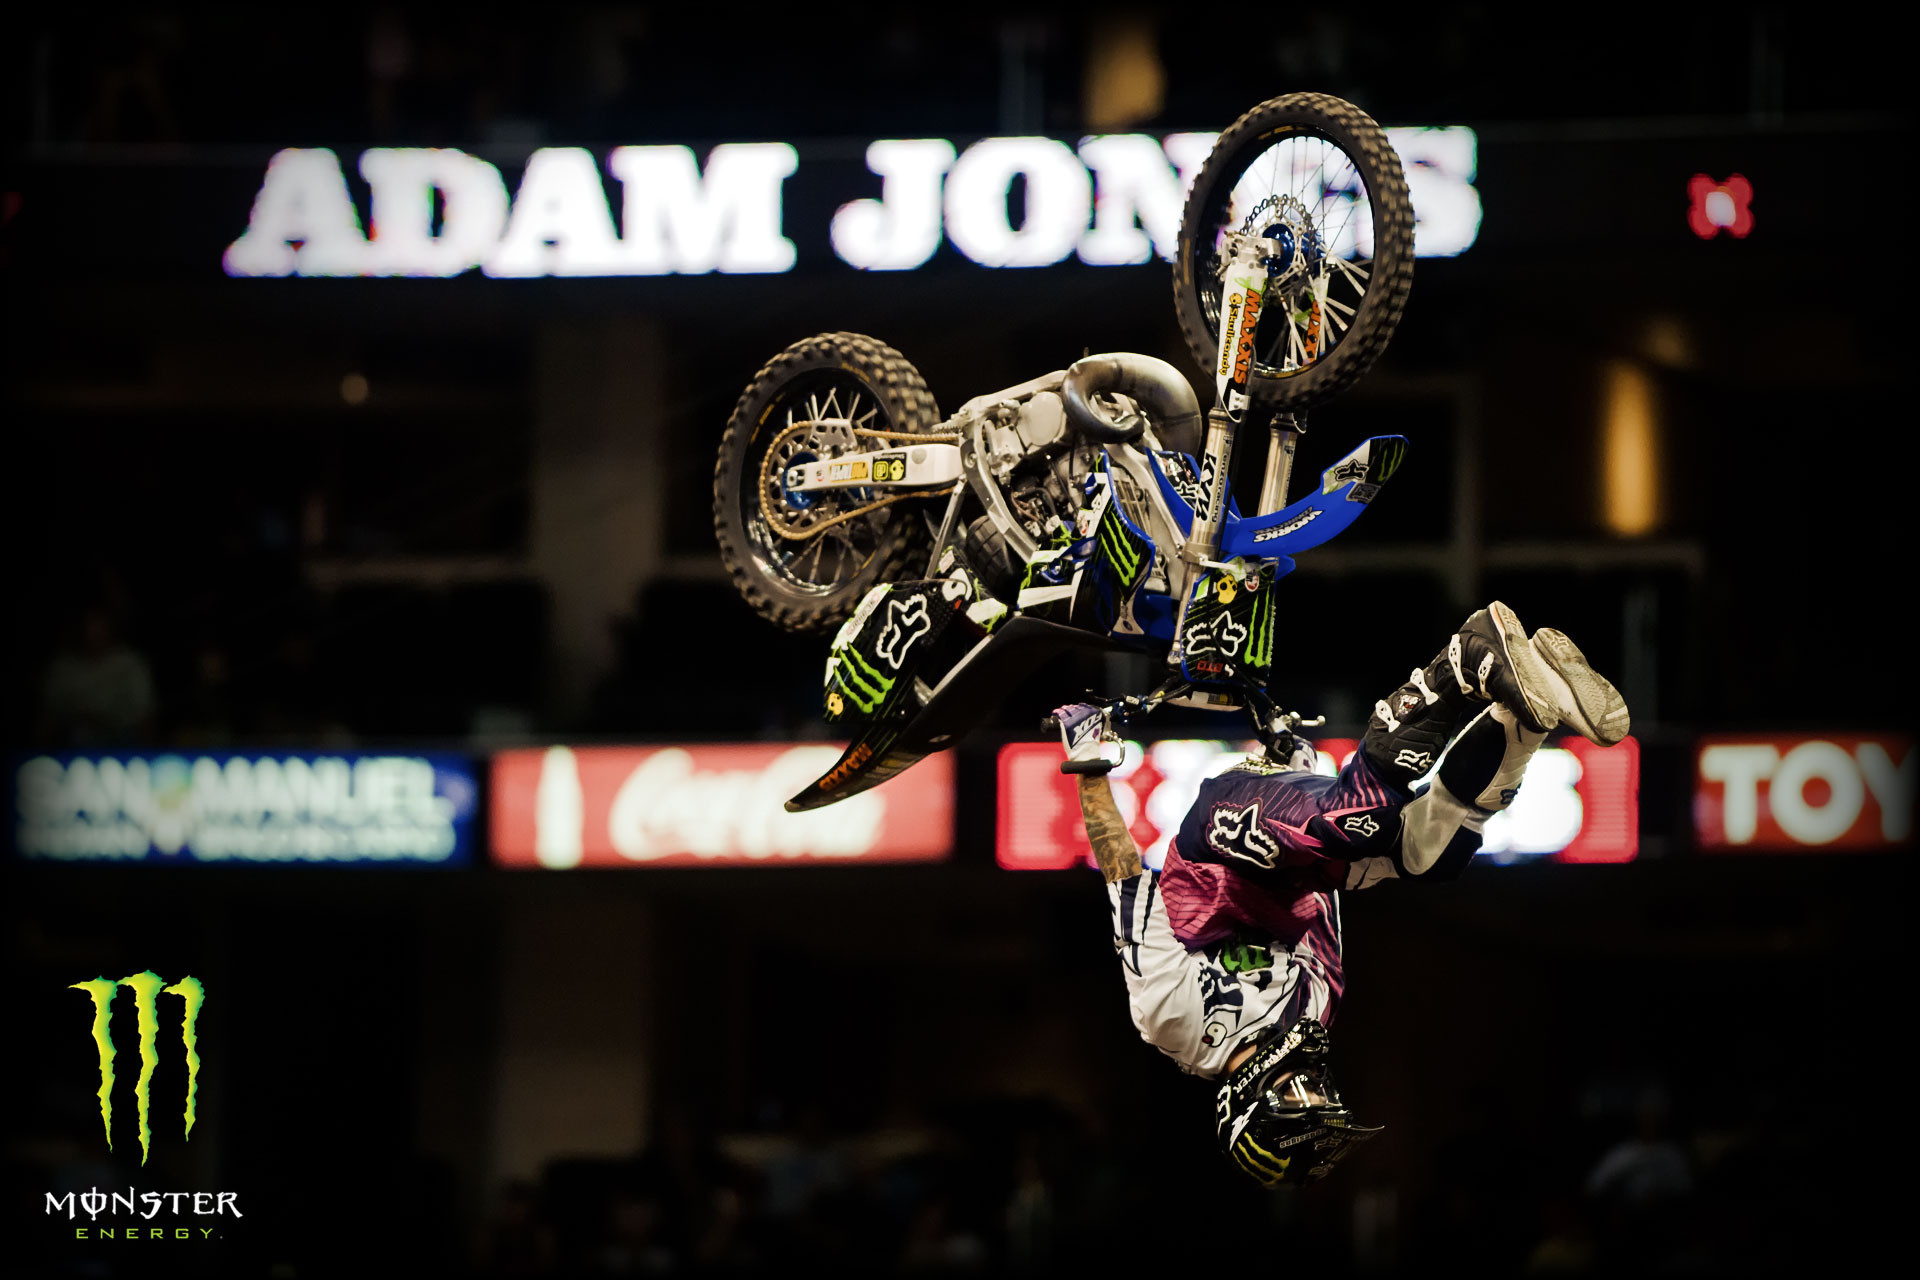 1920x1280 Take a look at these cool Monster Energy wallpapers from the X Games.